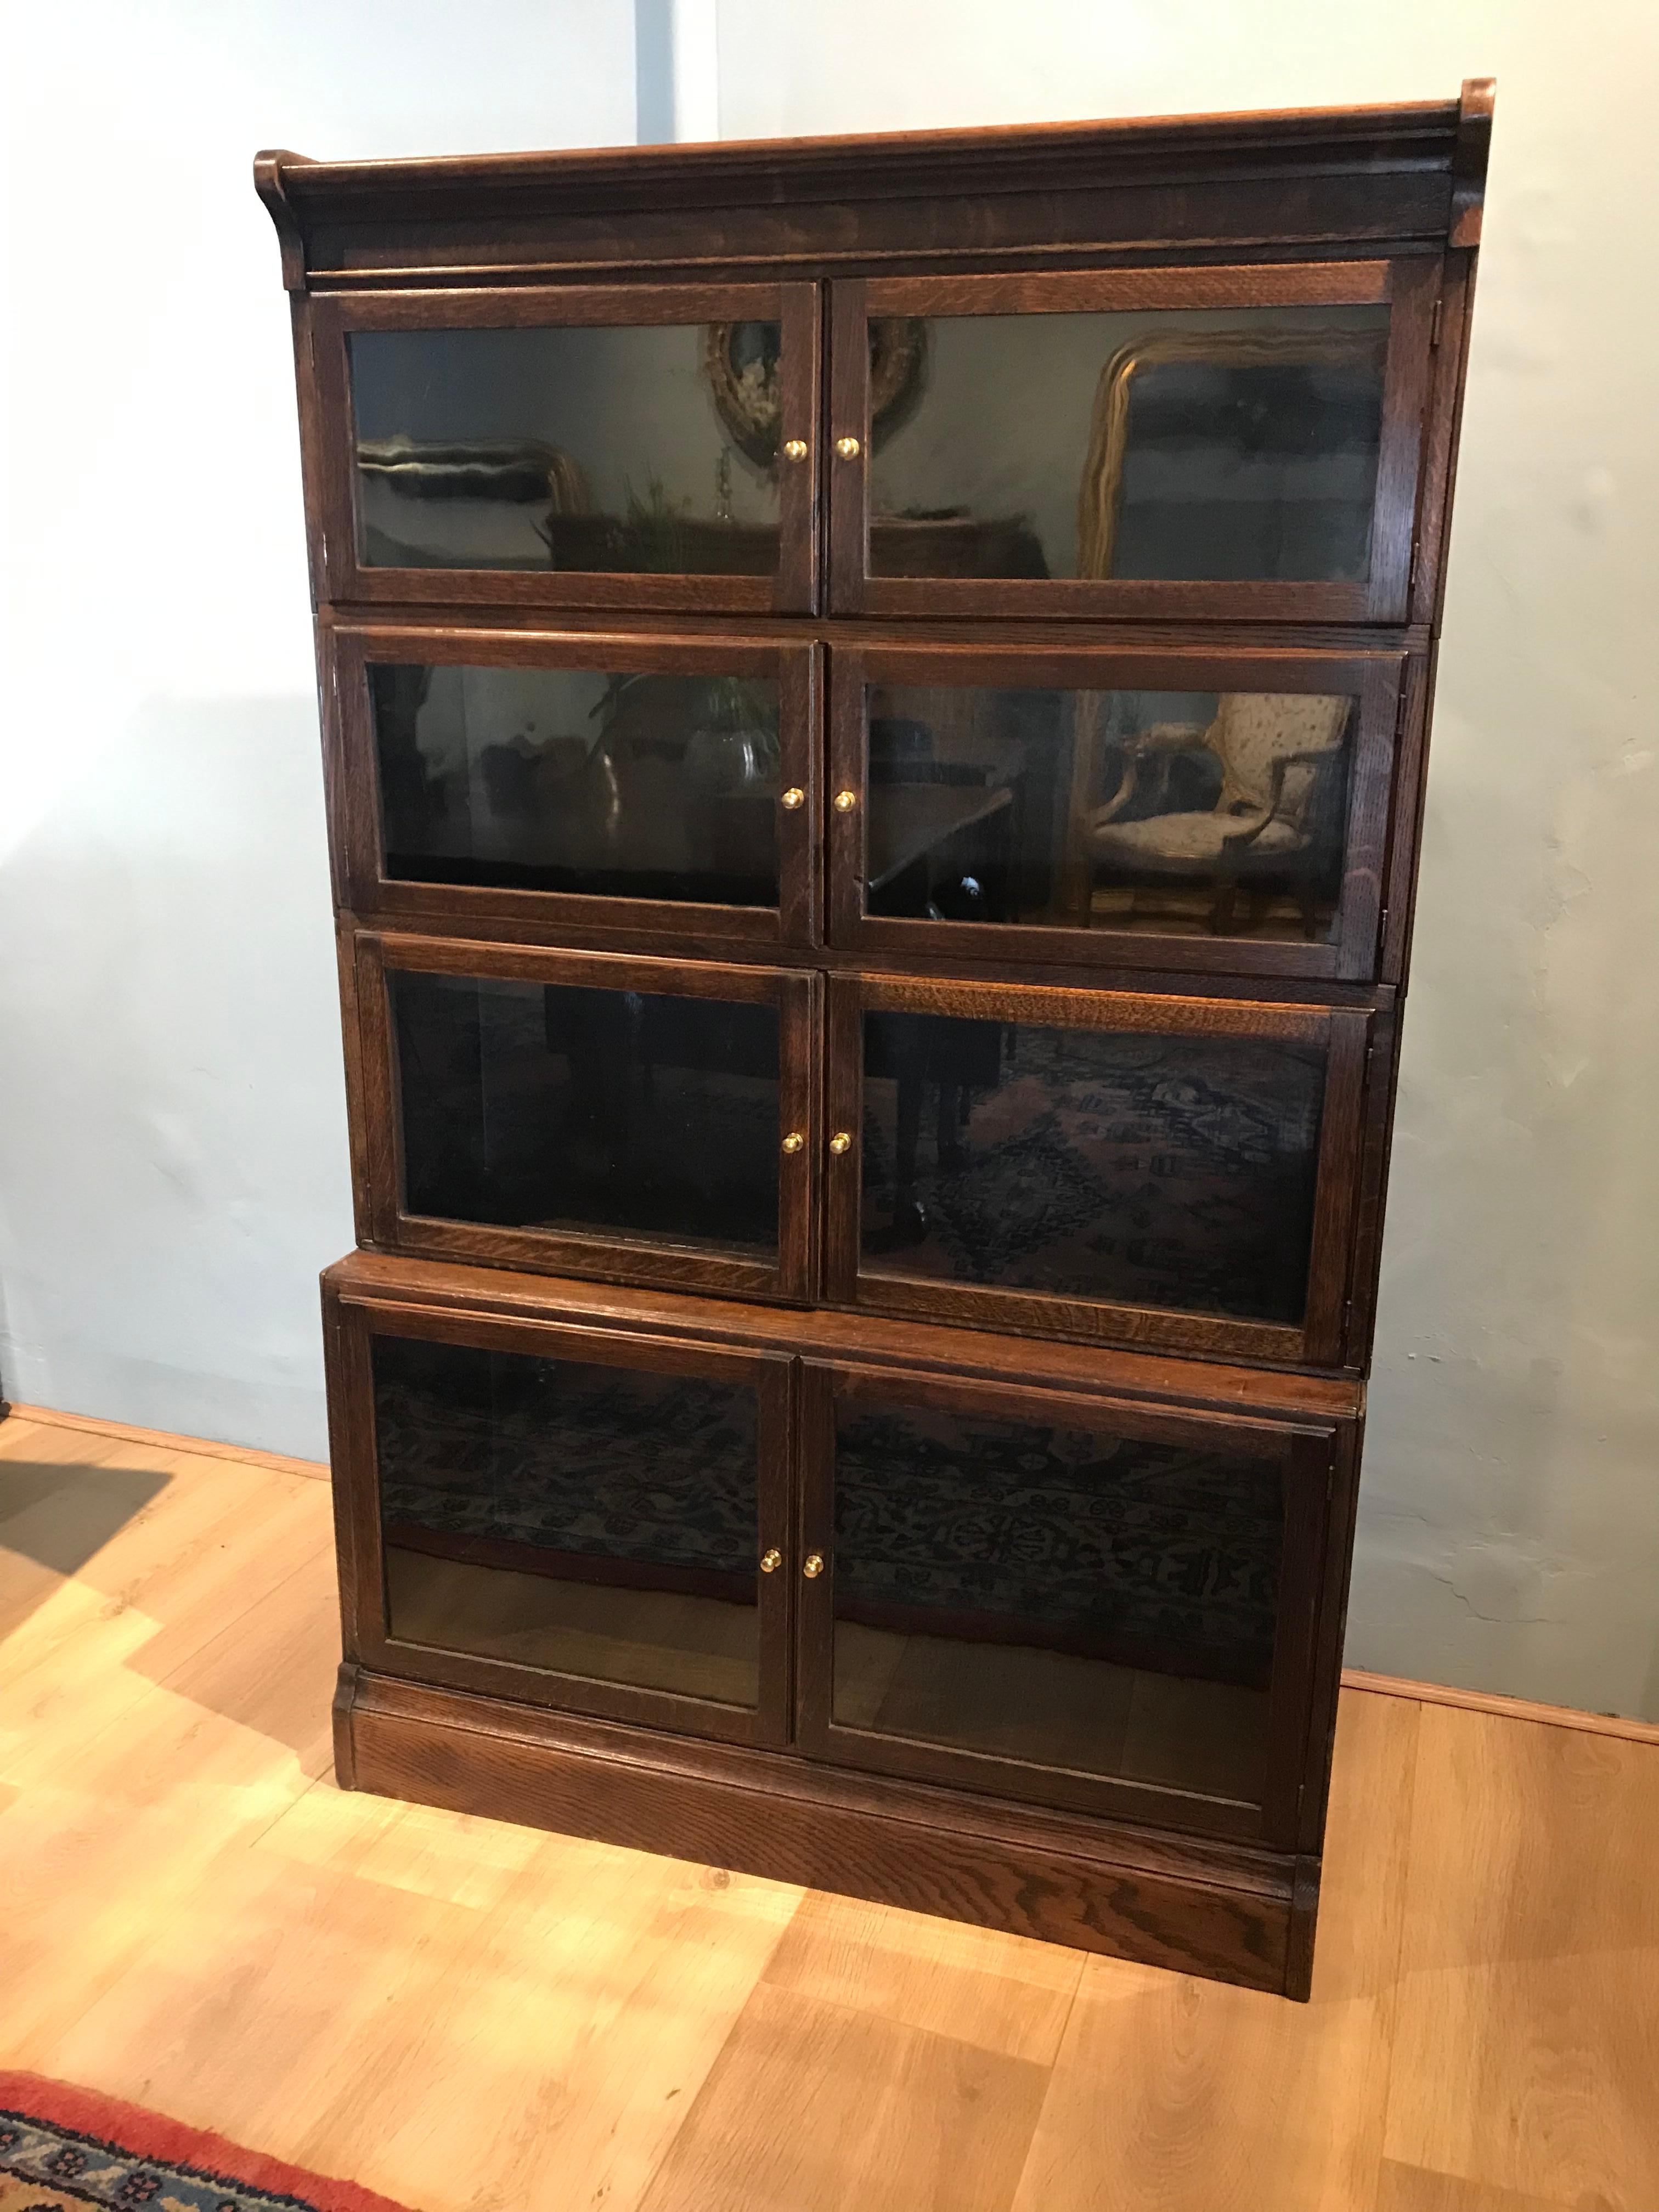 Oak Minty of Oxford style, modular, stacking, glazed bookcase in four sections.
Excellent condition with hand blown glass glazed doors and brass handles.
The lower base section is a depth of 30 cm graduating to a depth of 24 cm in the other three